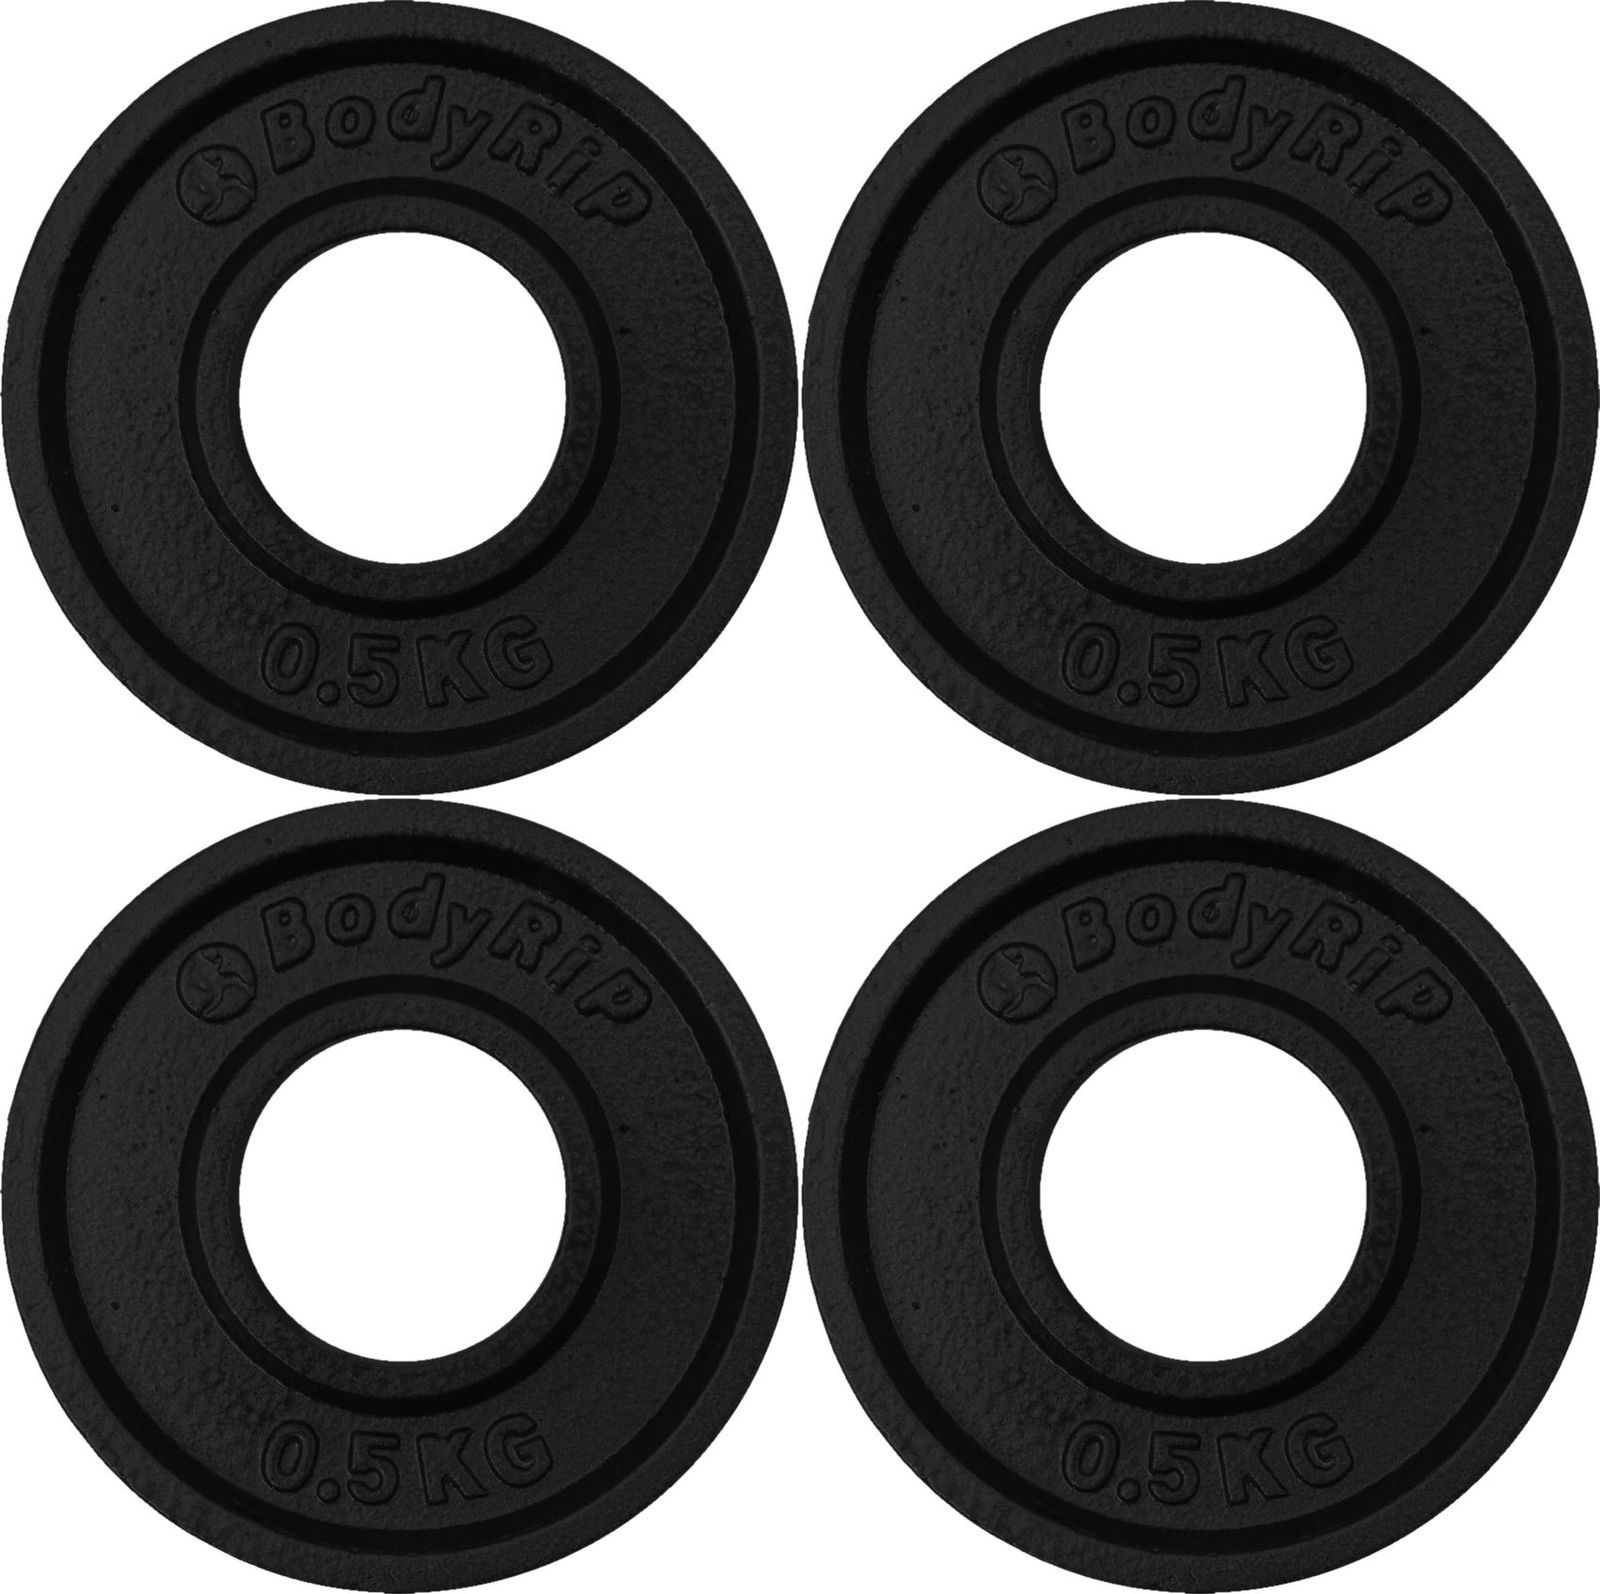 Cast Iron 2 x 0.5Kg Weight Discs 1" clearance hole Plates for 1" Bars